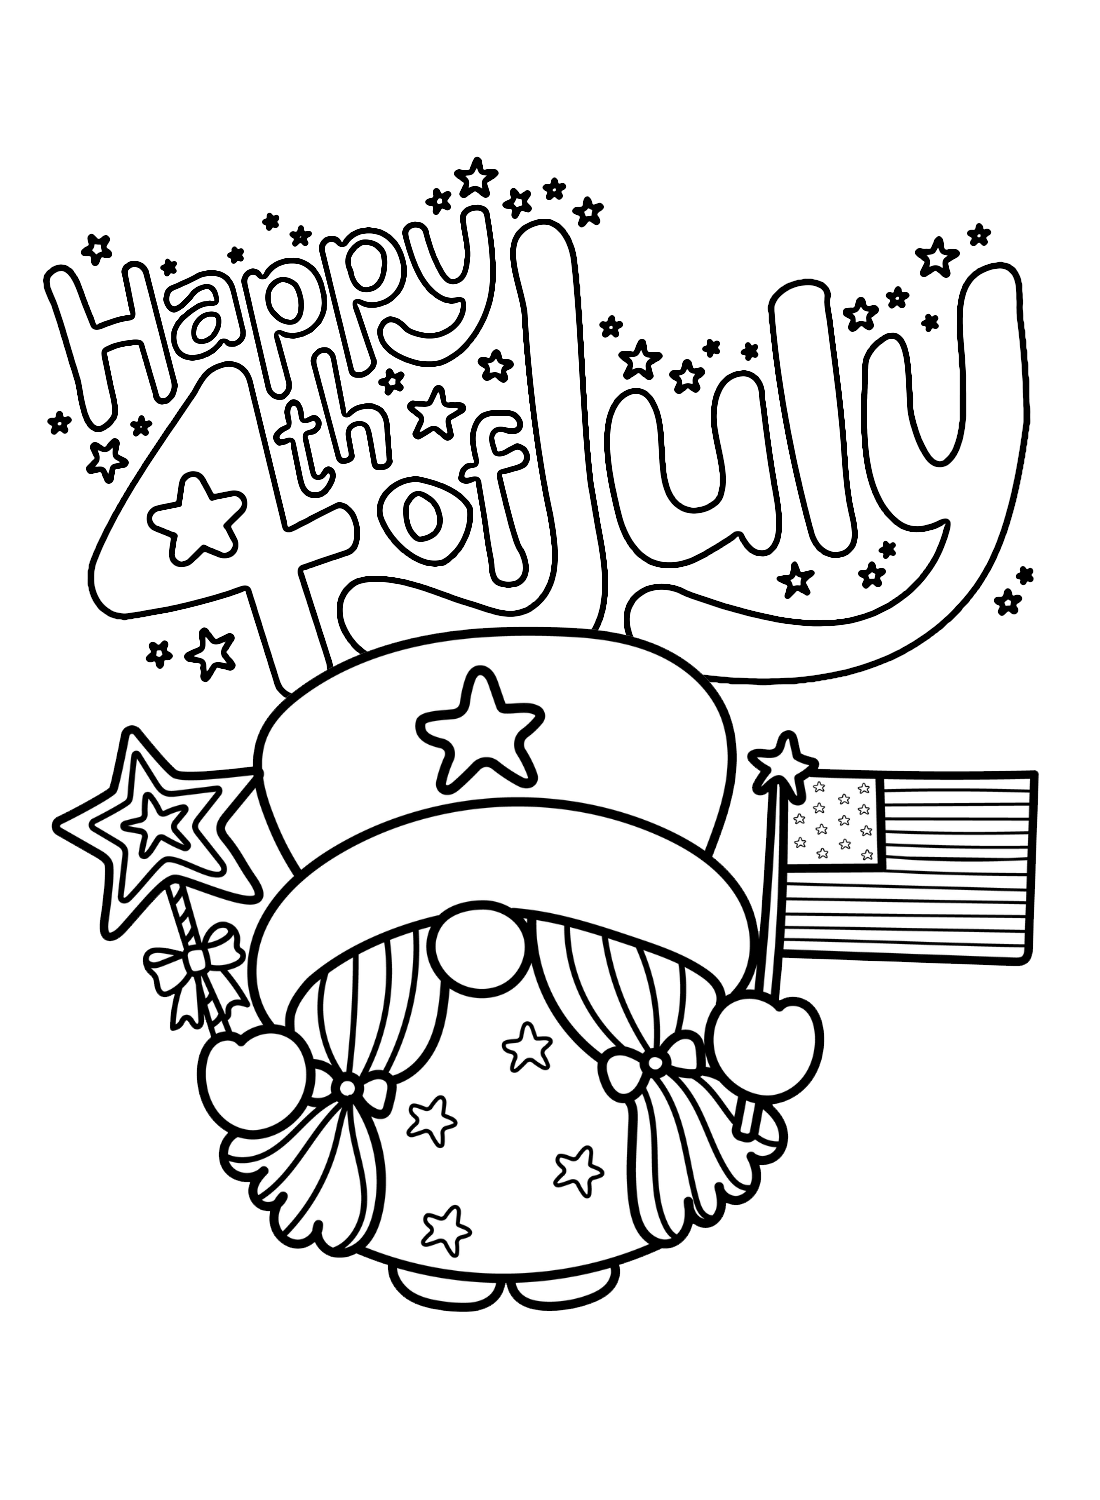 Happy 4th of July With Gnome Coloring Page